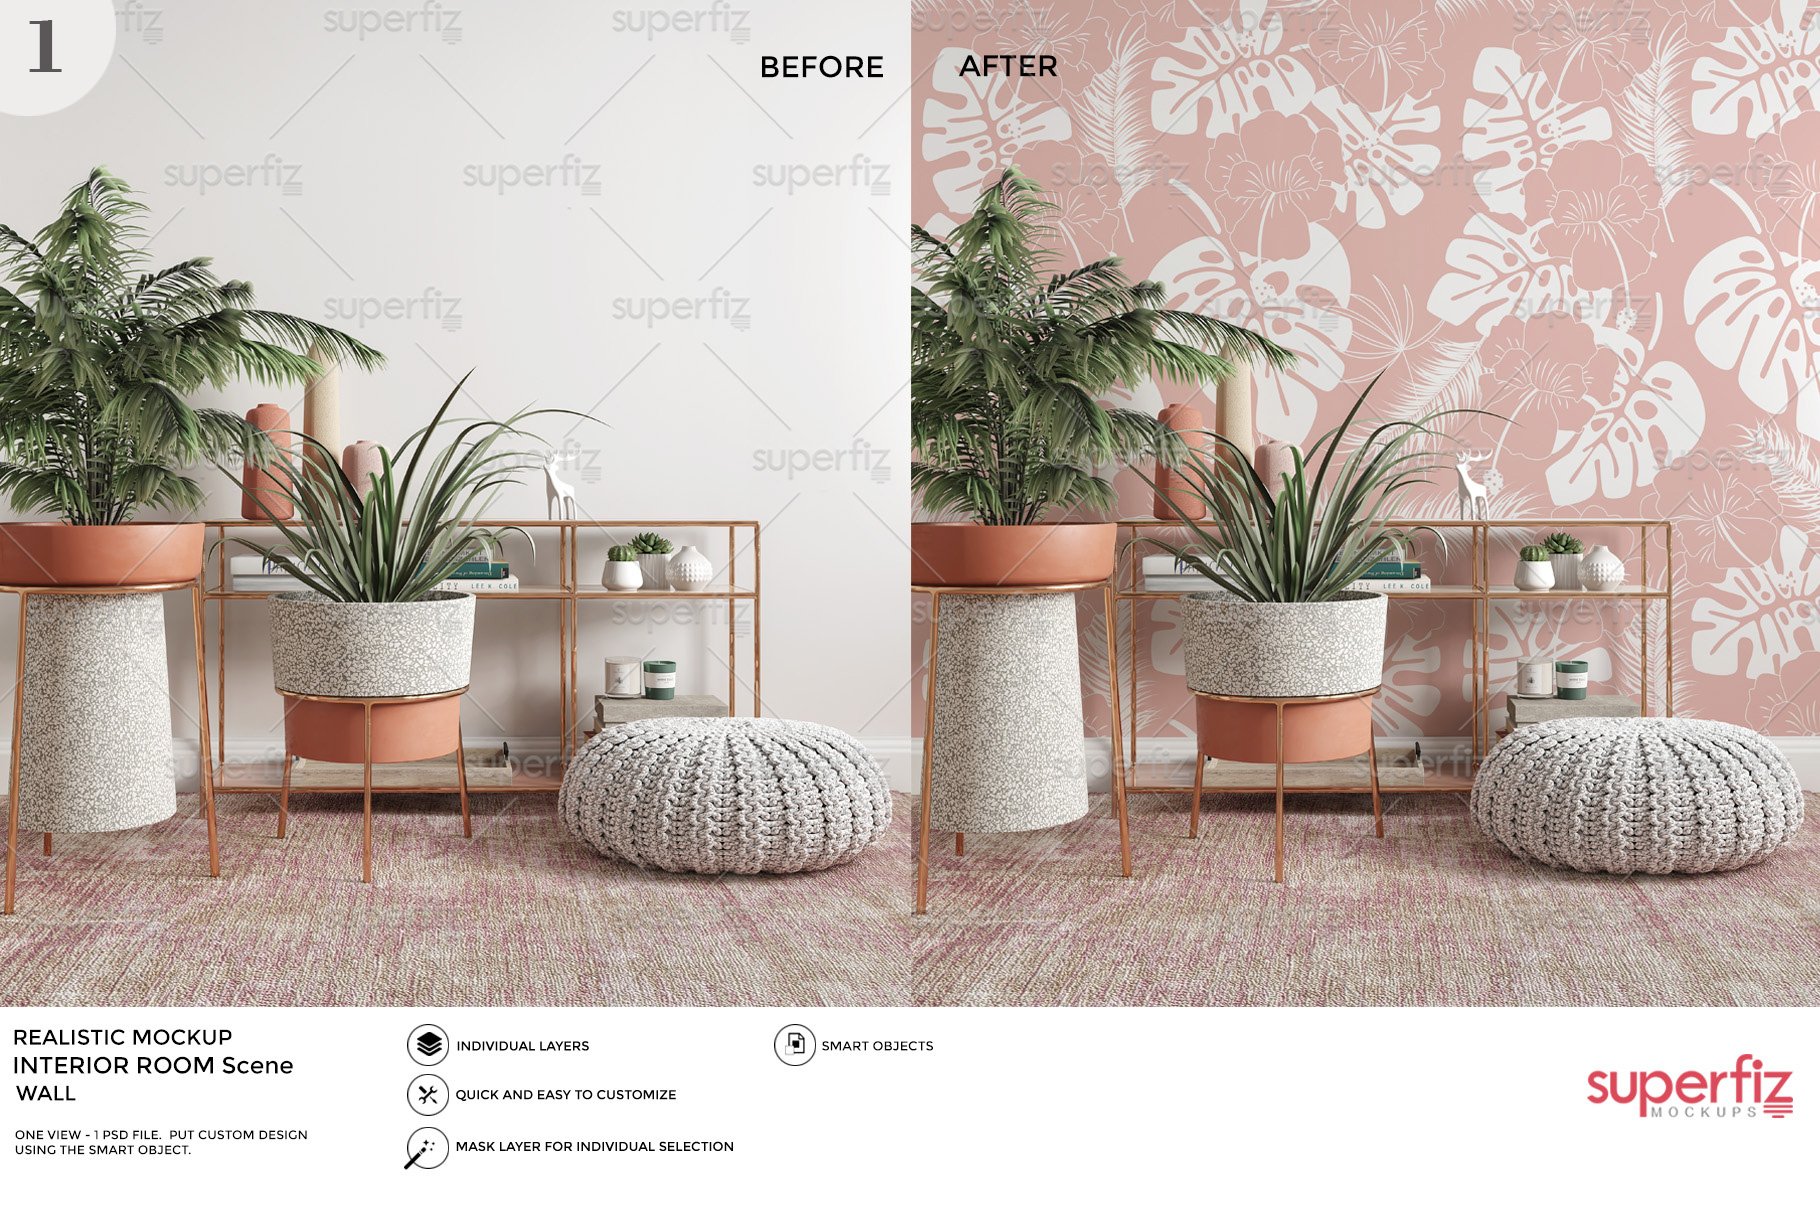 Wallpaper in pastel with flowers.